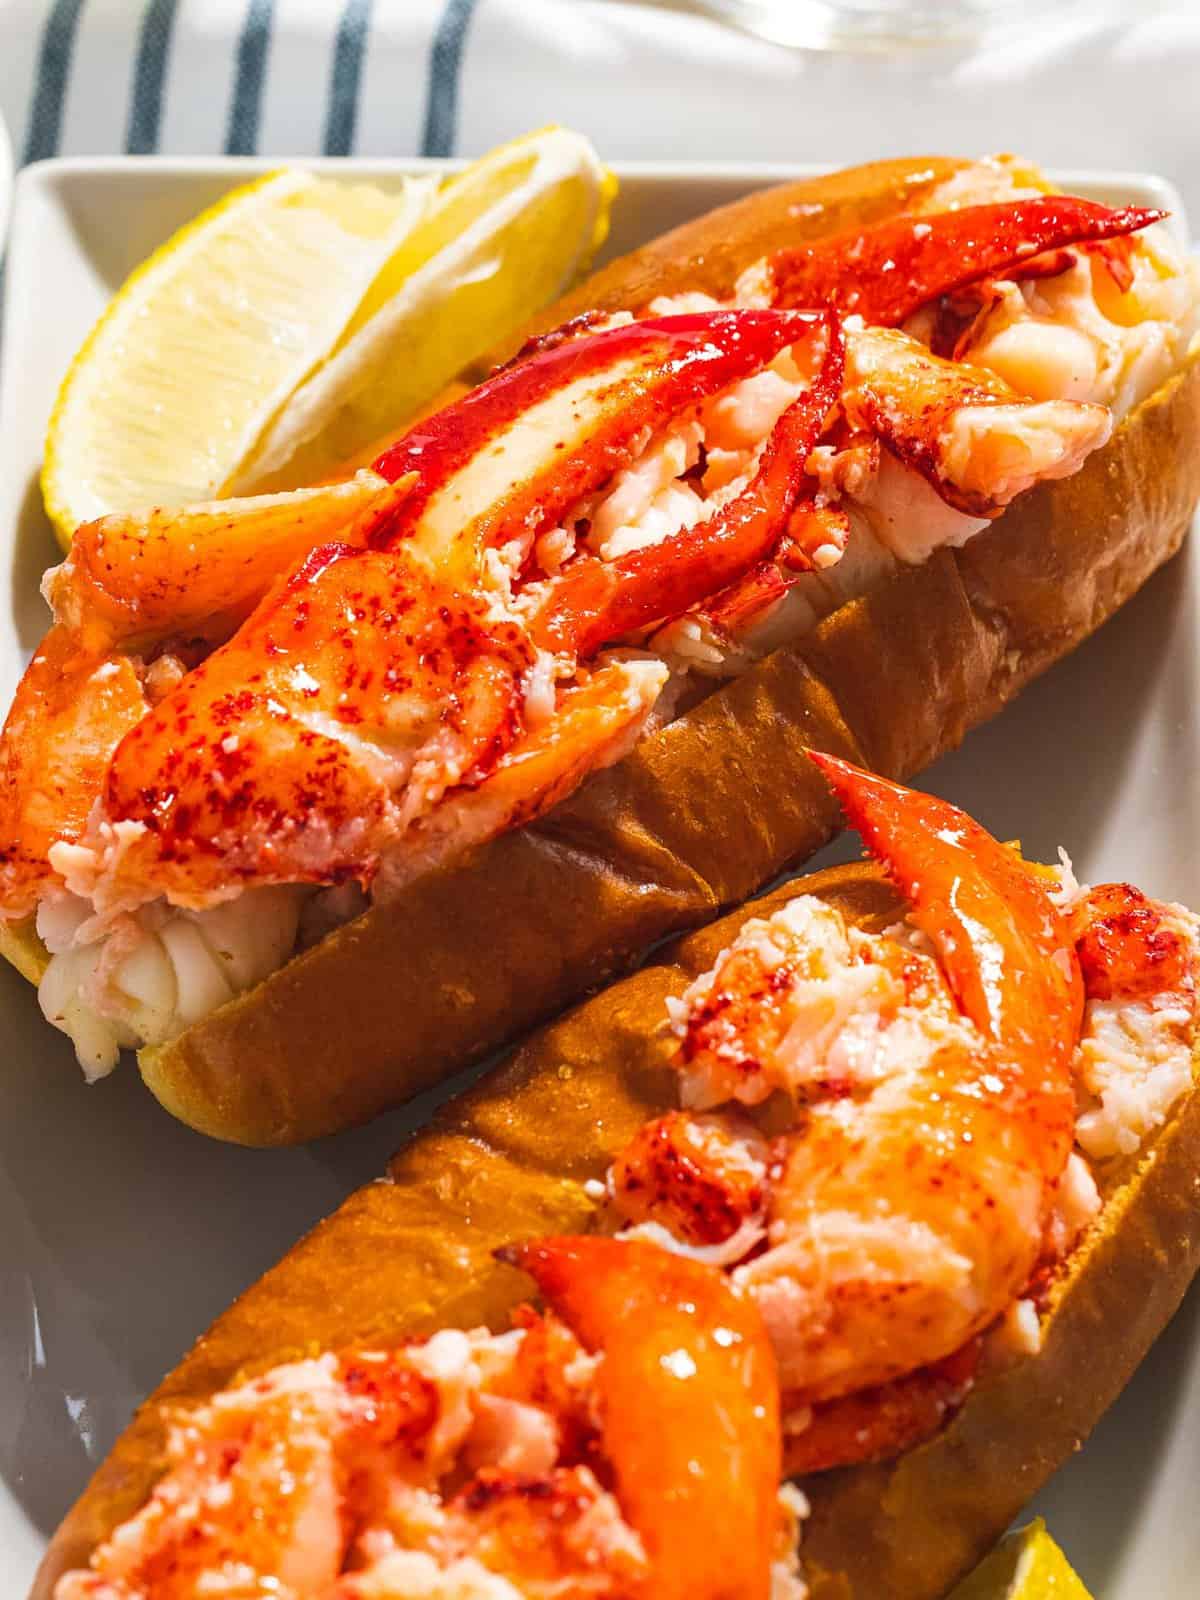 Buttered lobster roll with red claw meat on a toasted bun.